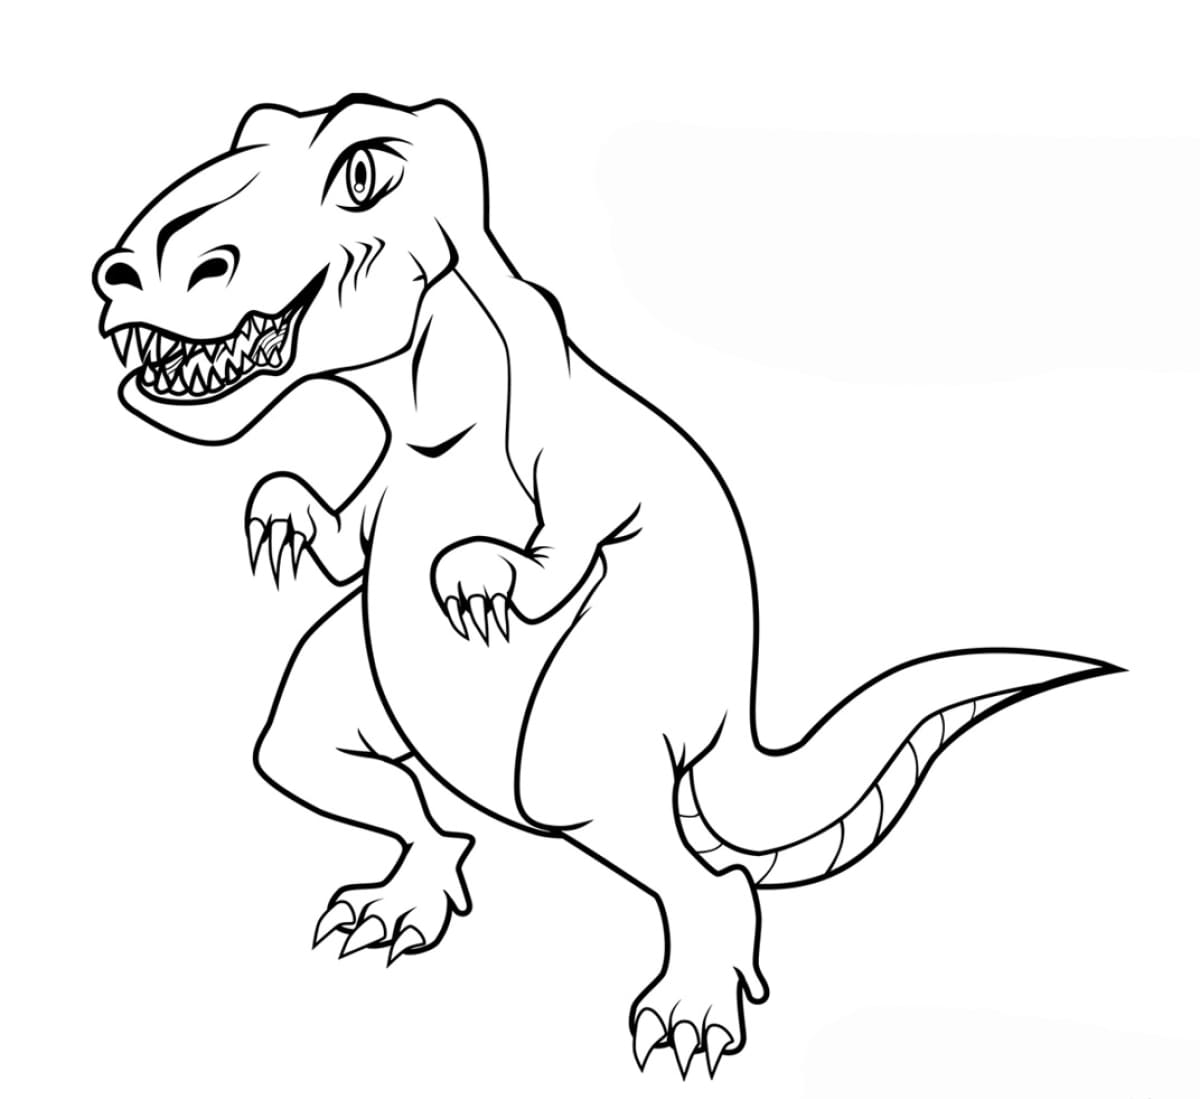 Coloring page T-rex Dinosaur T-Rex for boys 6-7 years old